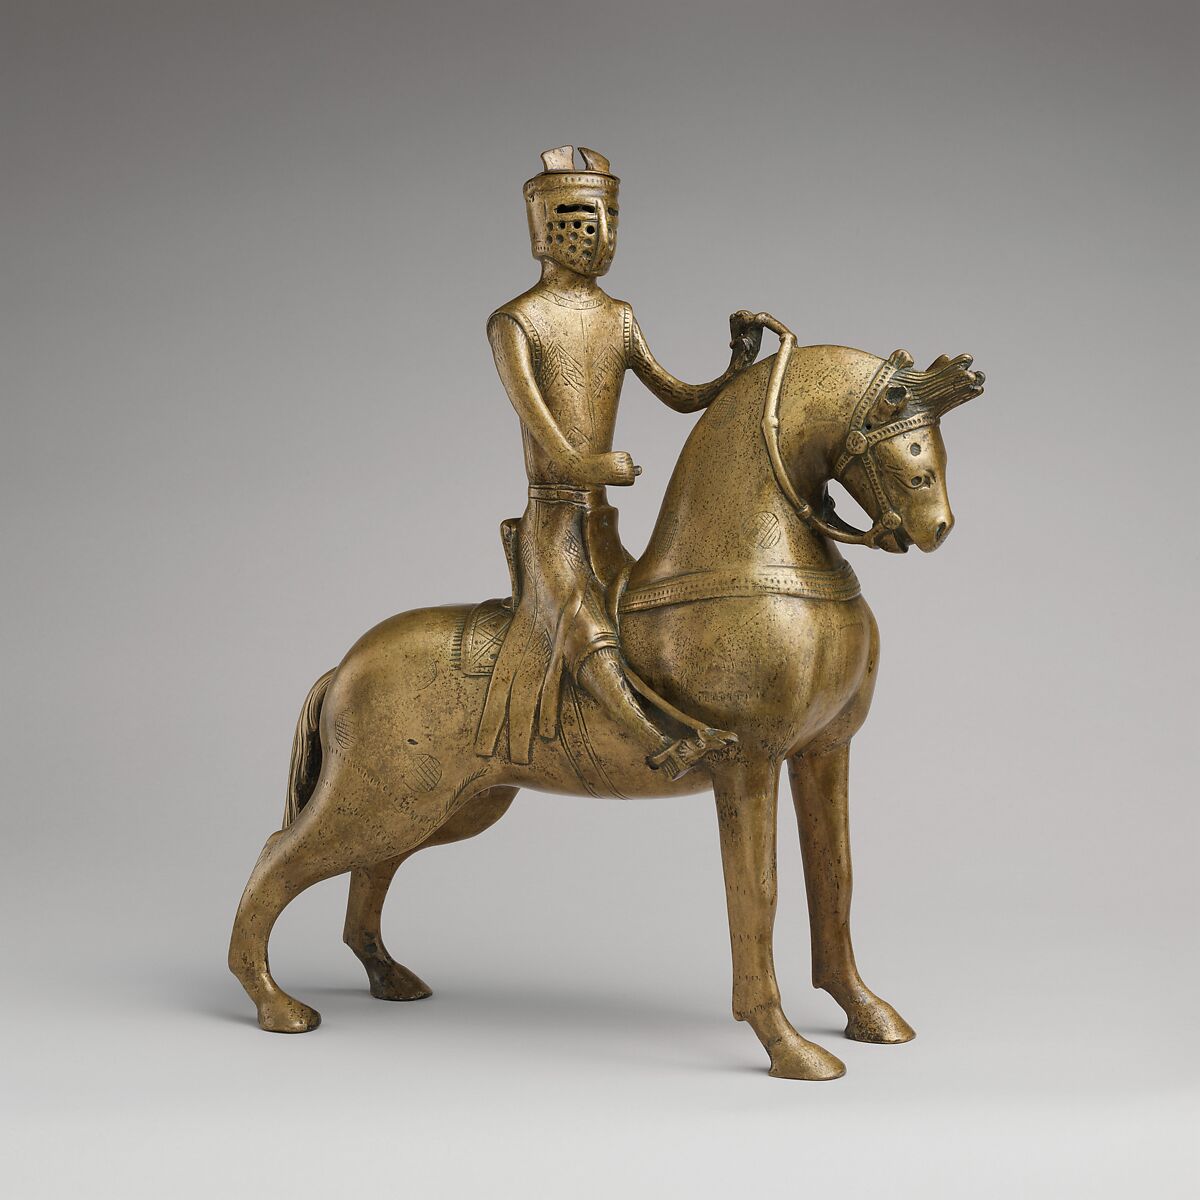 Aquamanile in the Form of a Mounted Knight, Copper alloy, German 